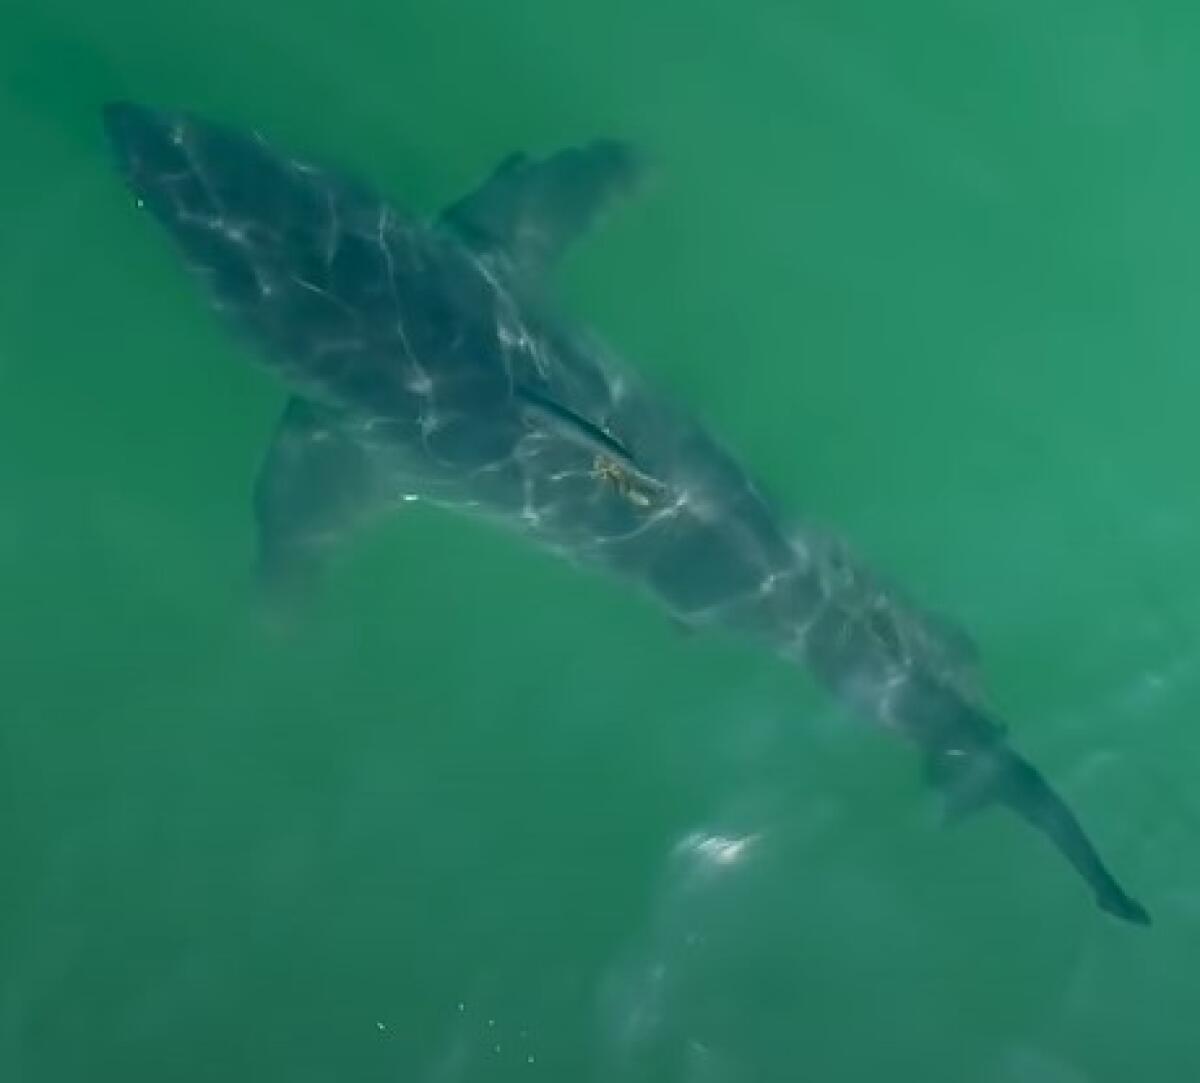 Overhead photo of a shark in shallow waters.